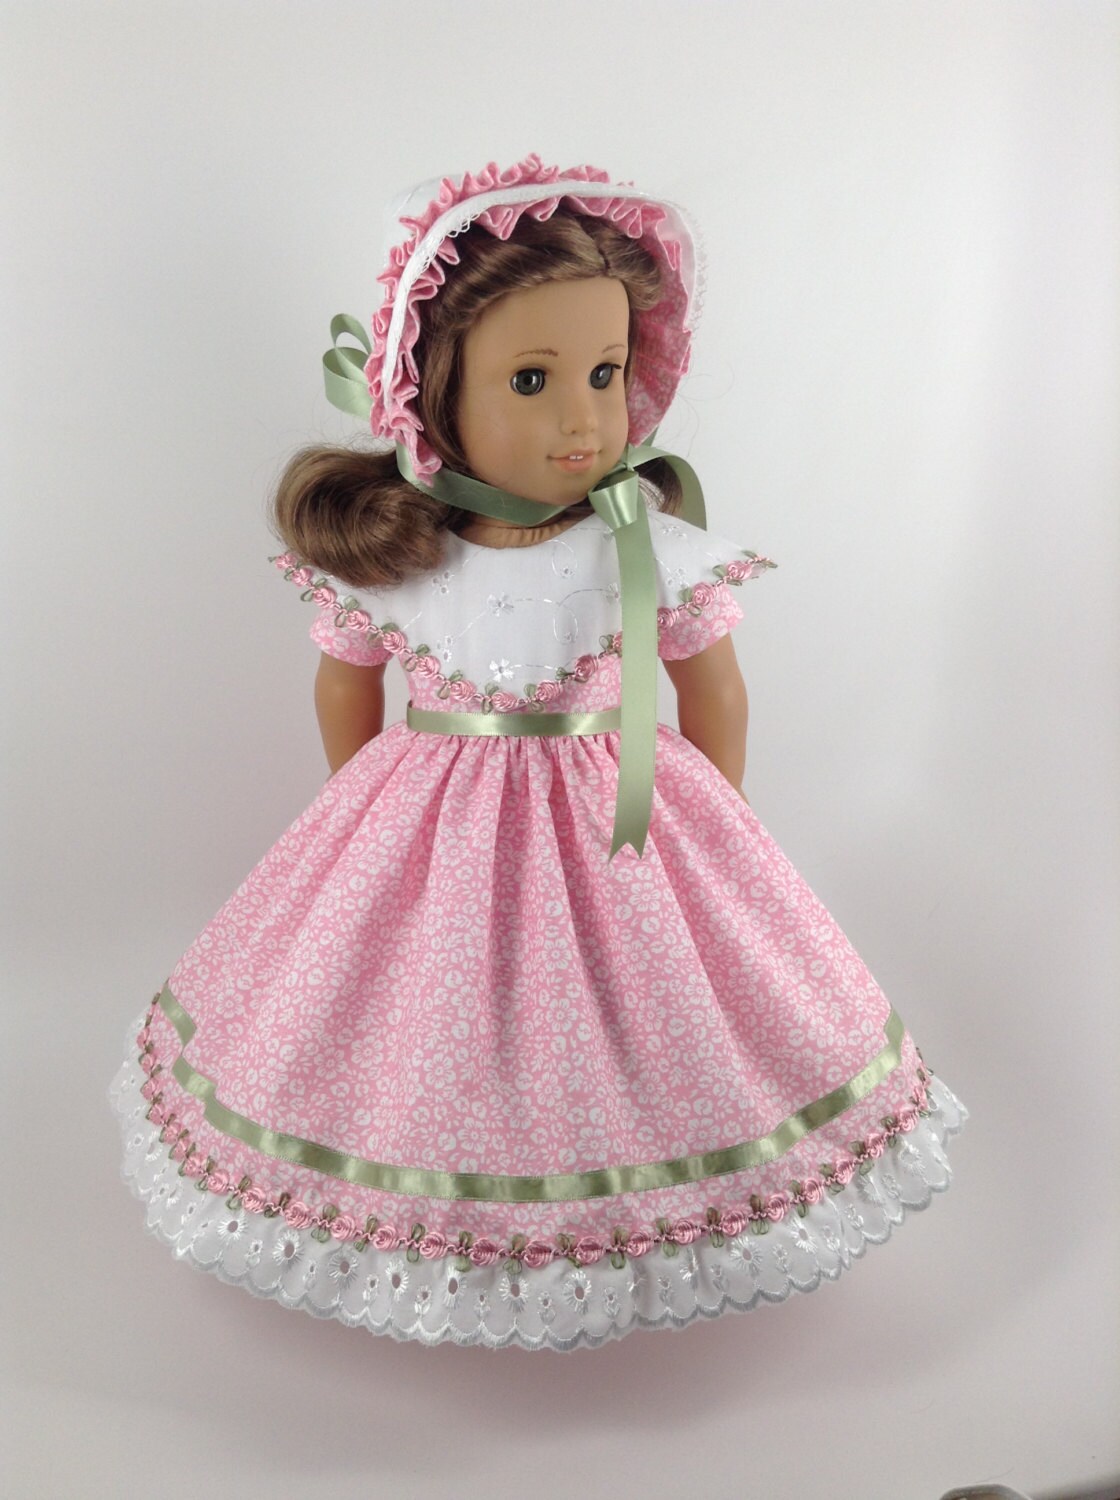 American Girl 18-inch Doll Clothes Floral Pink/White Dress | Etsy